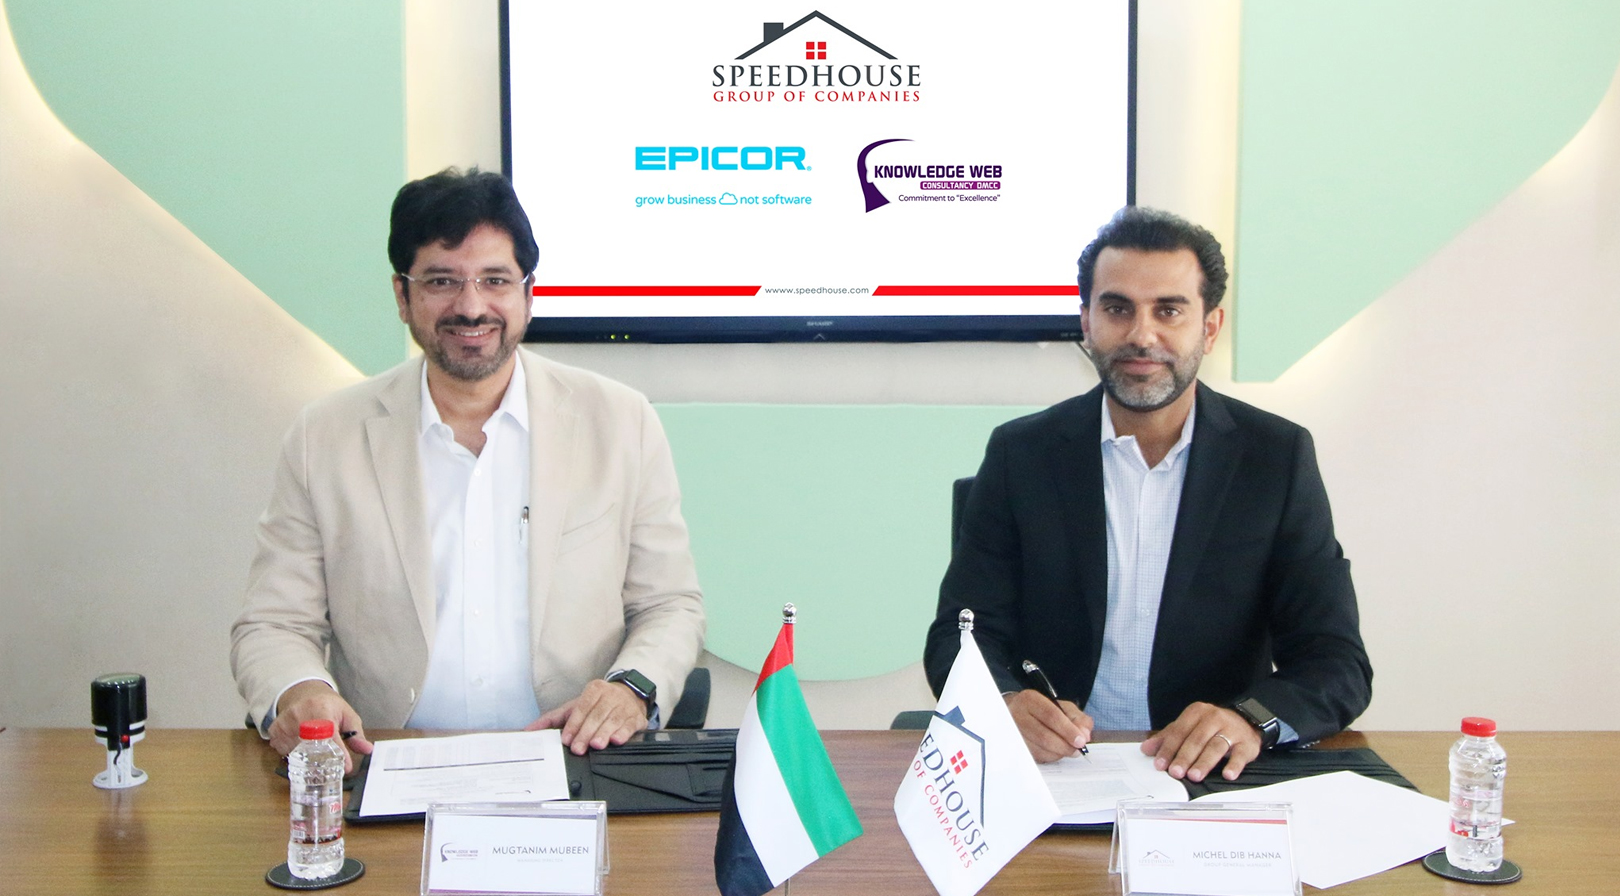 Speed House Group implemented the EPICOR software solution through Knowledge Web consultancy, Dubai.